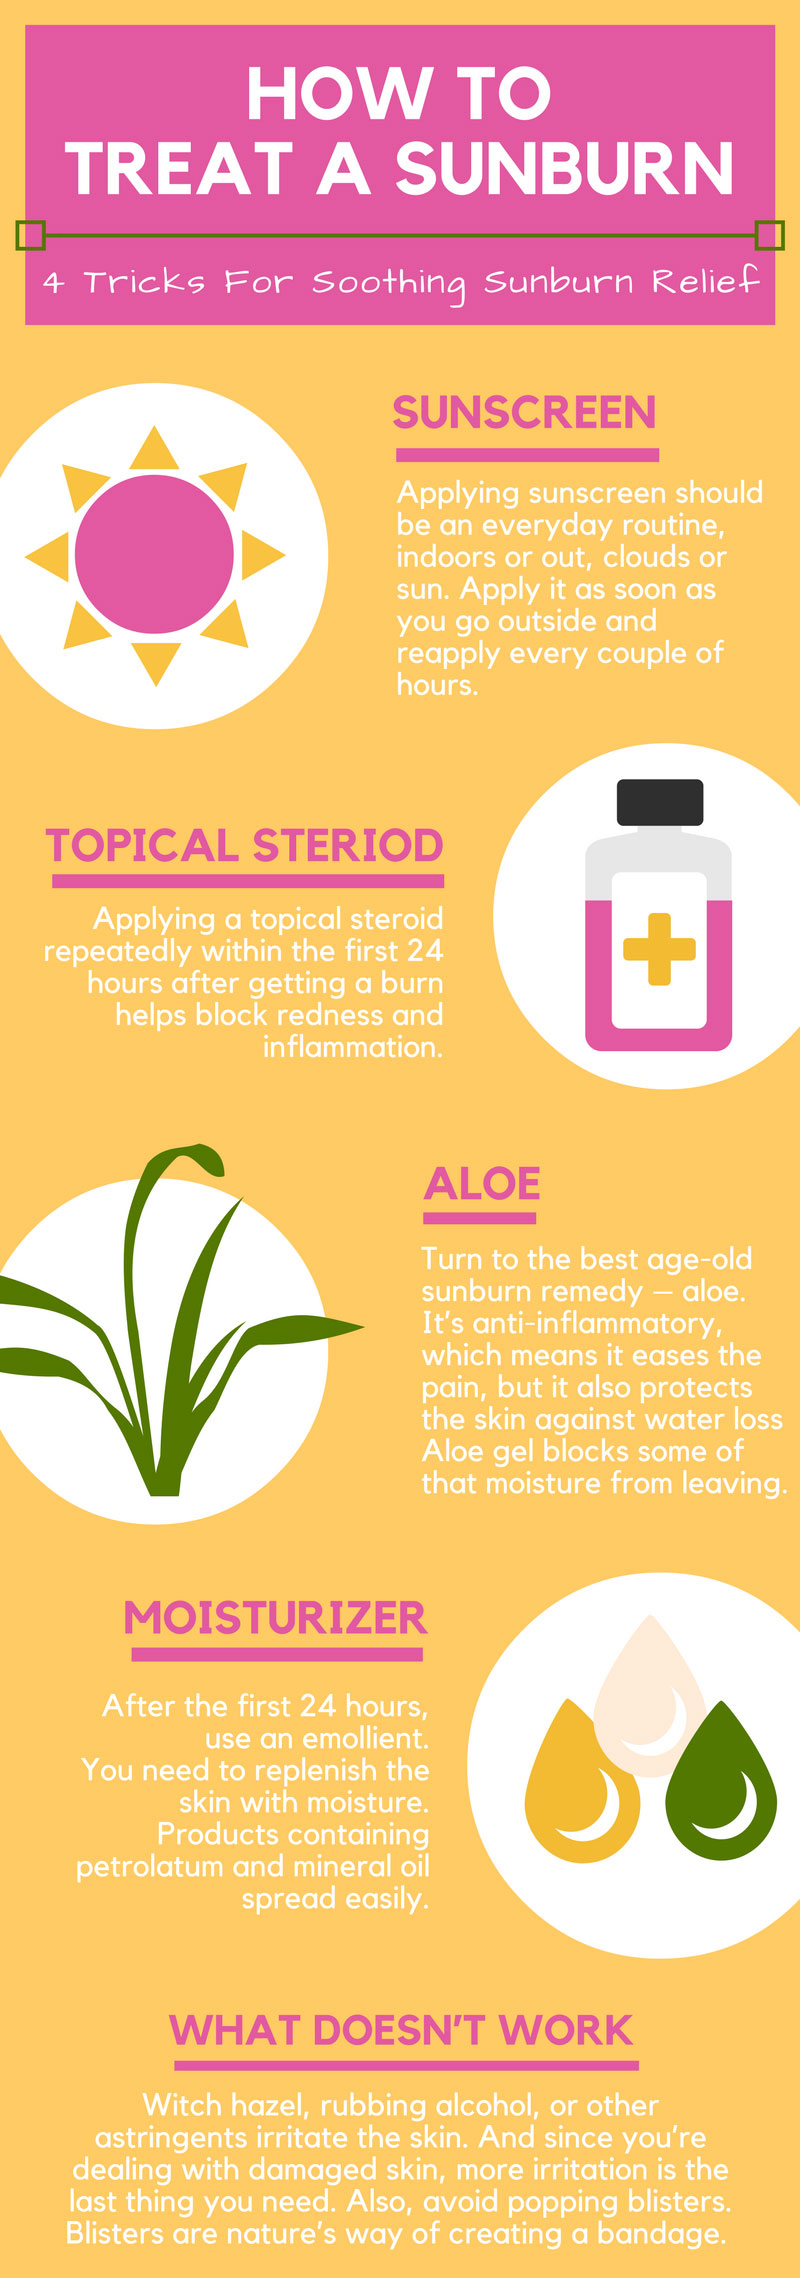 how-to-treat-a-sunburn-infographic